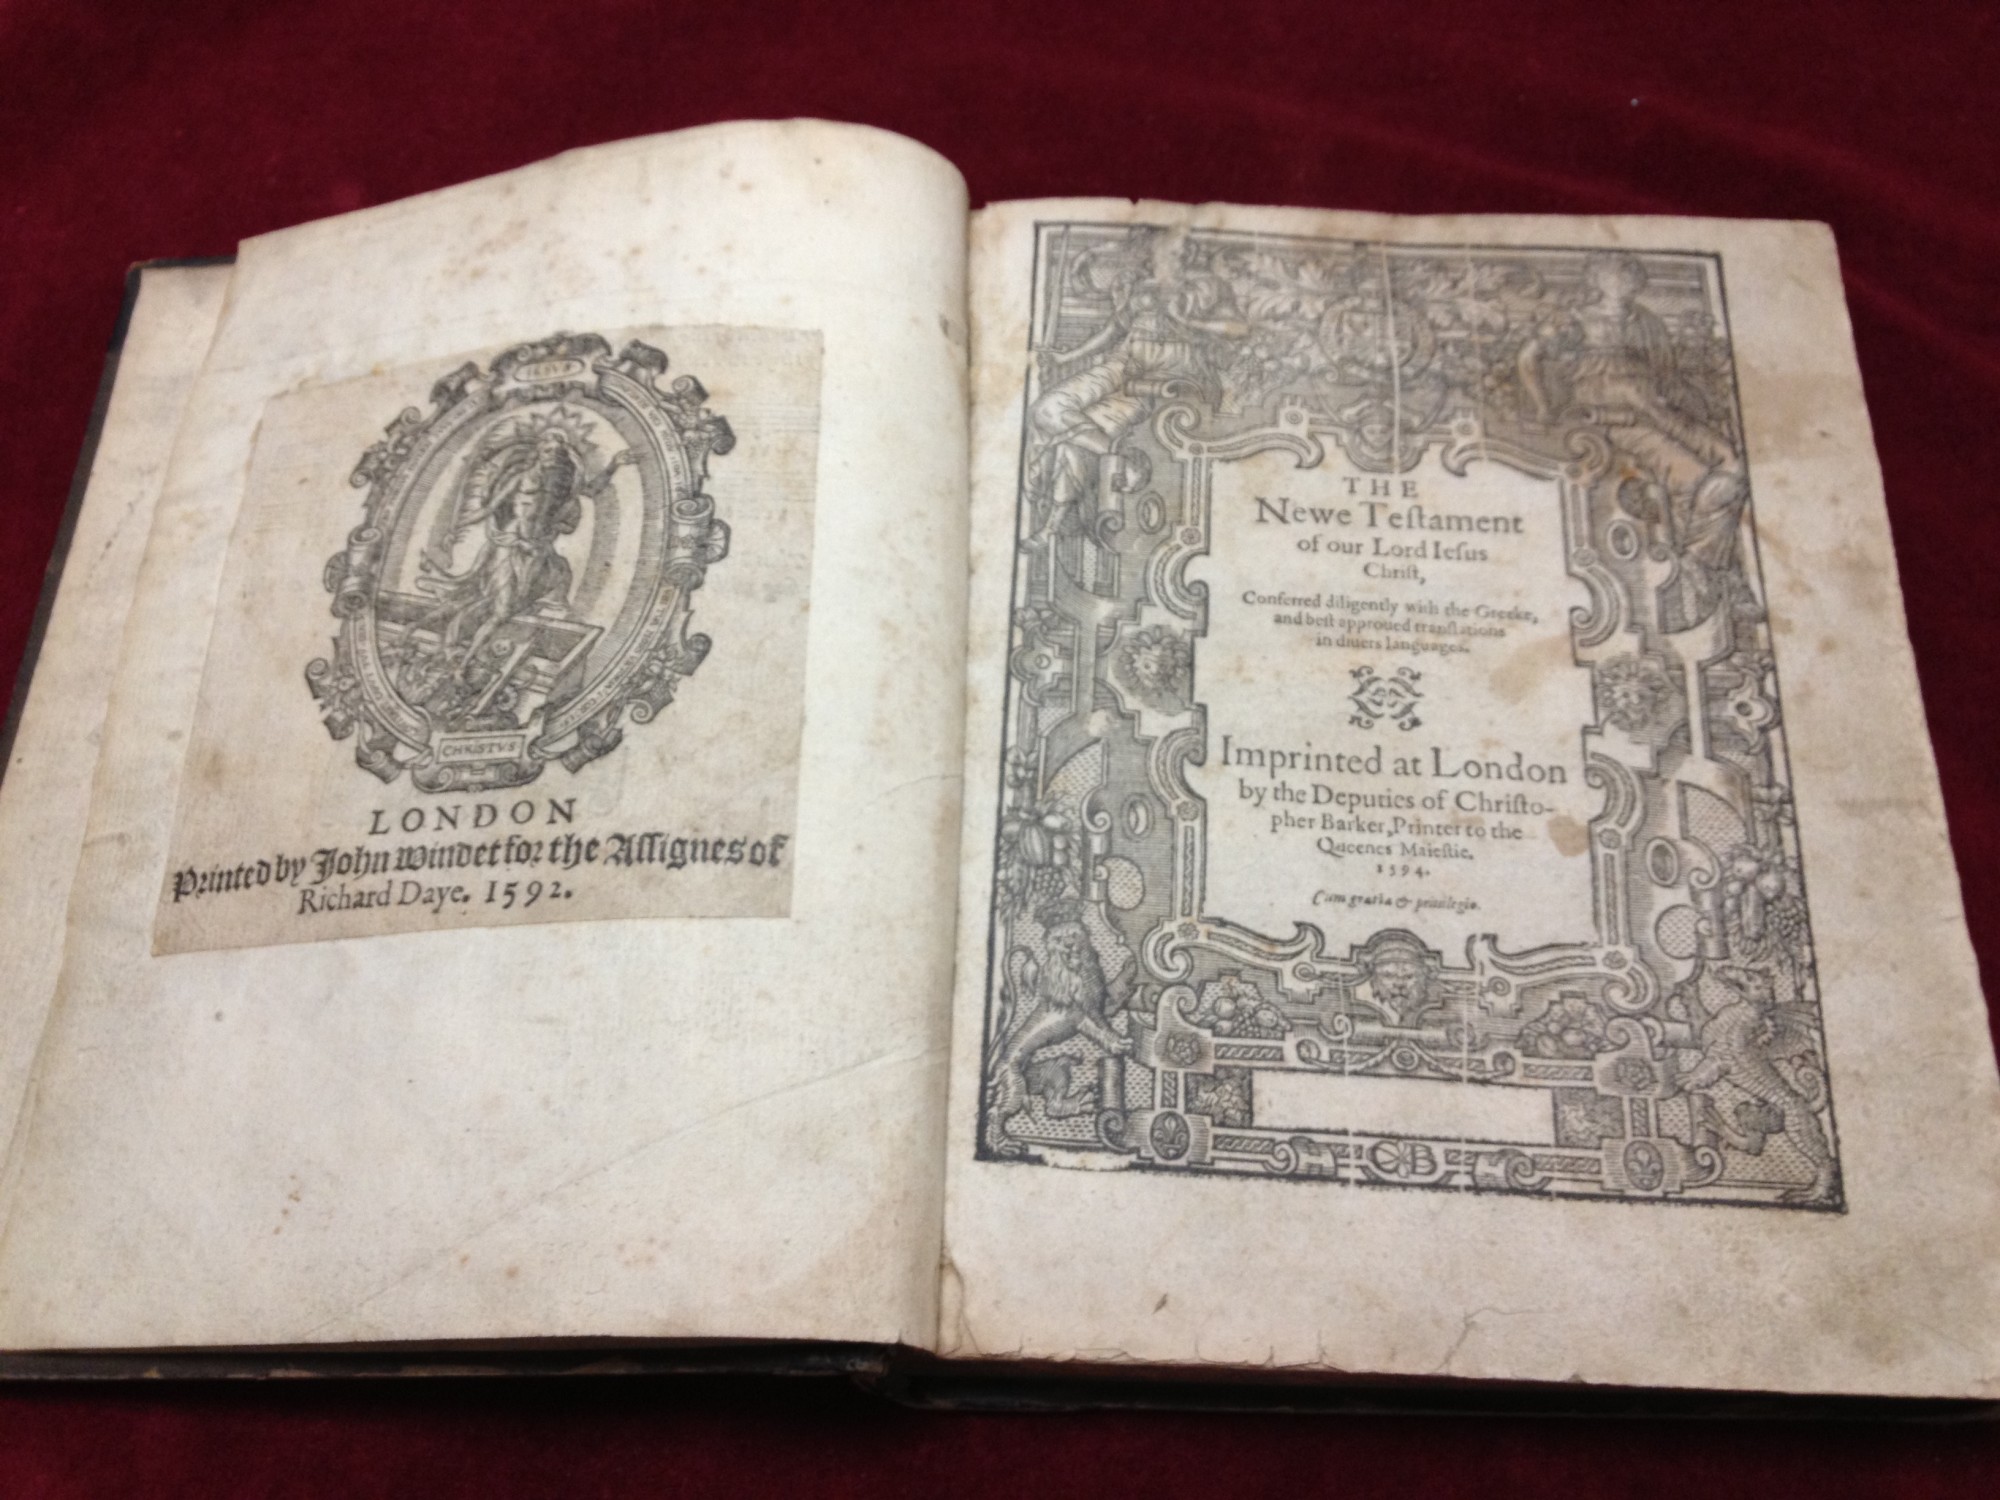 Rare antiquarian incunable Christopher Barker 1594